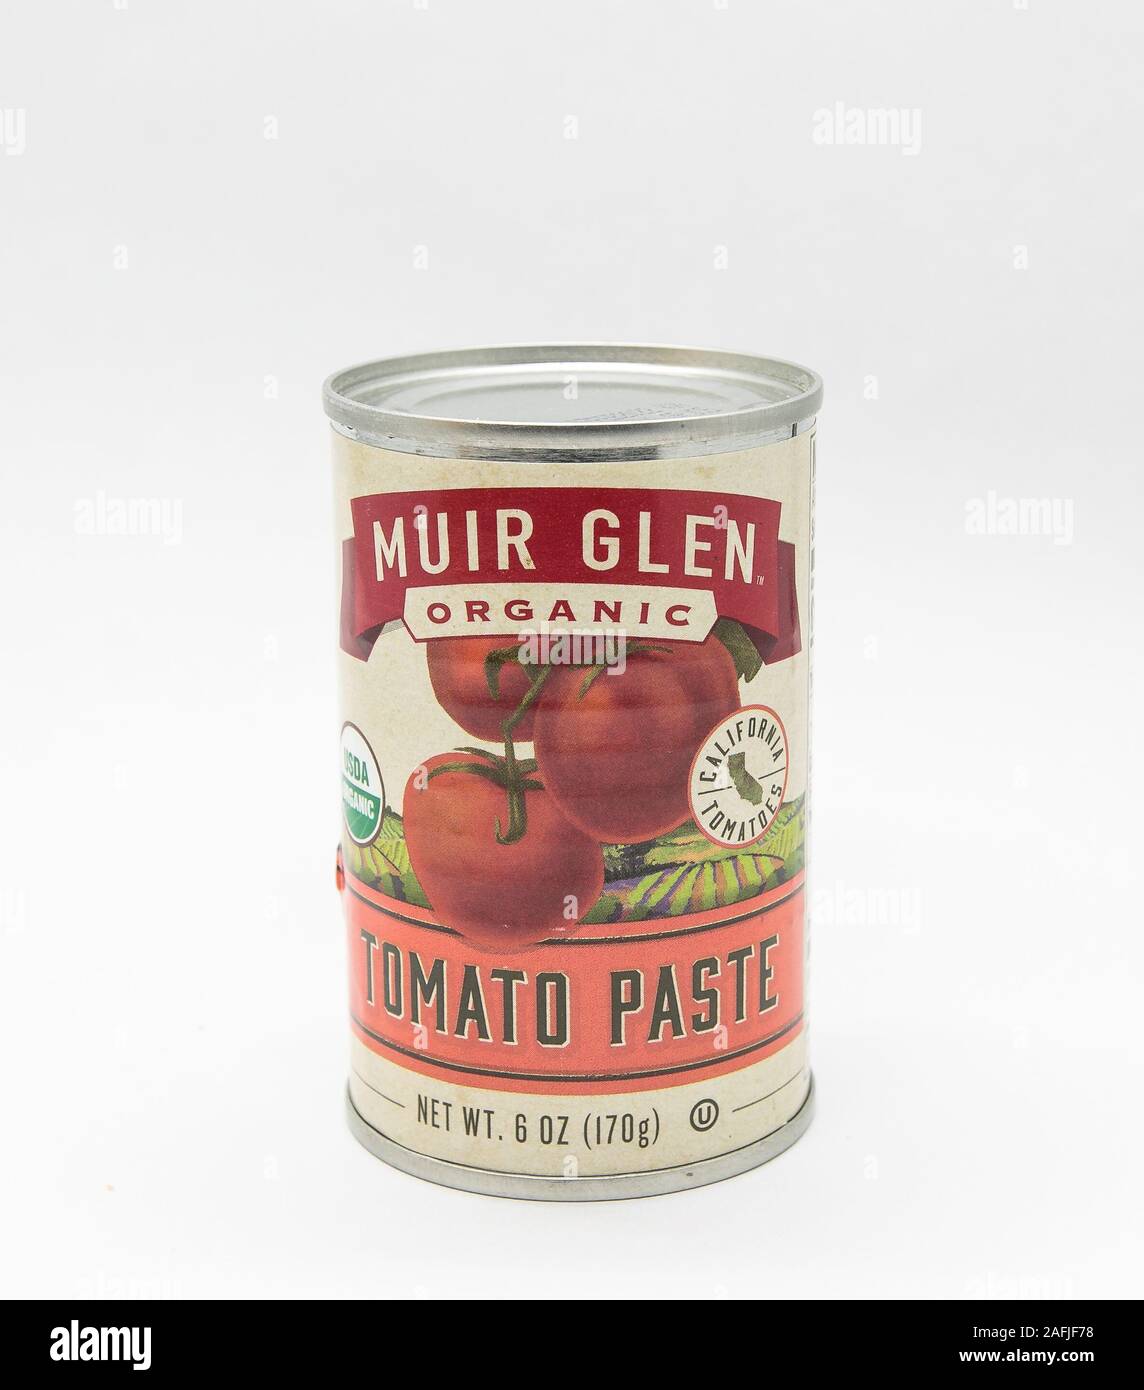 New York, 12/8/2019: Can of Muir Glen tomato paste stands against white background. Stock Photo